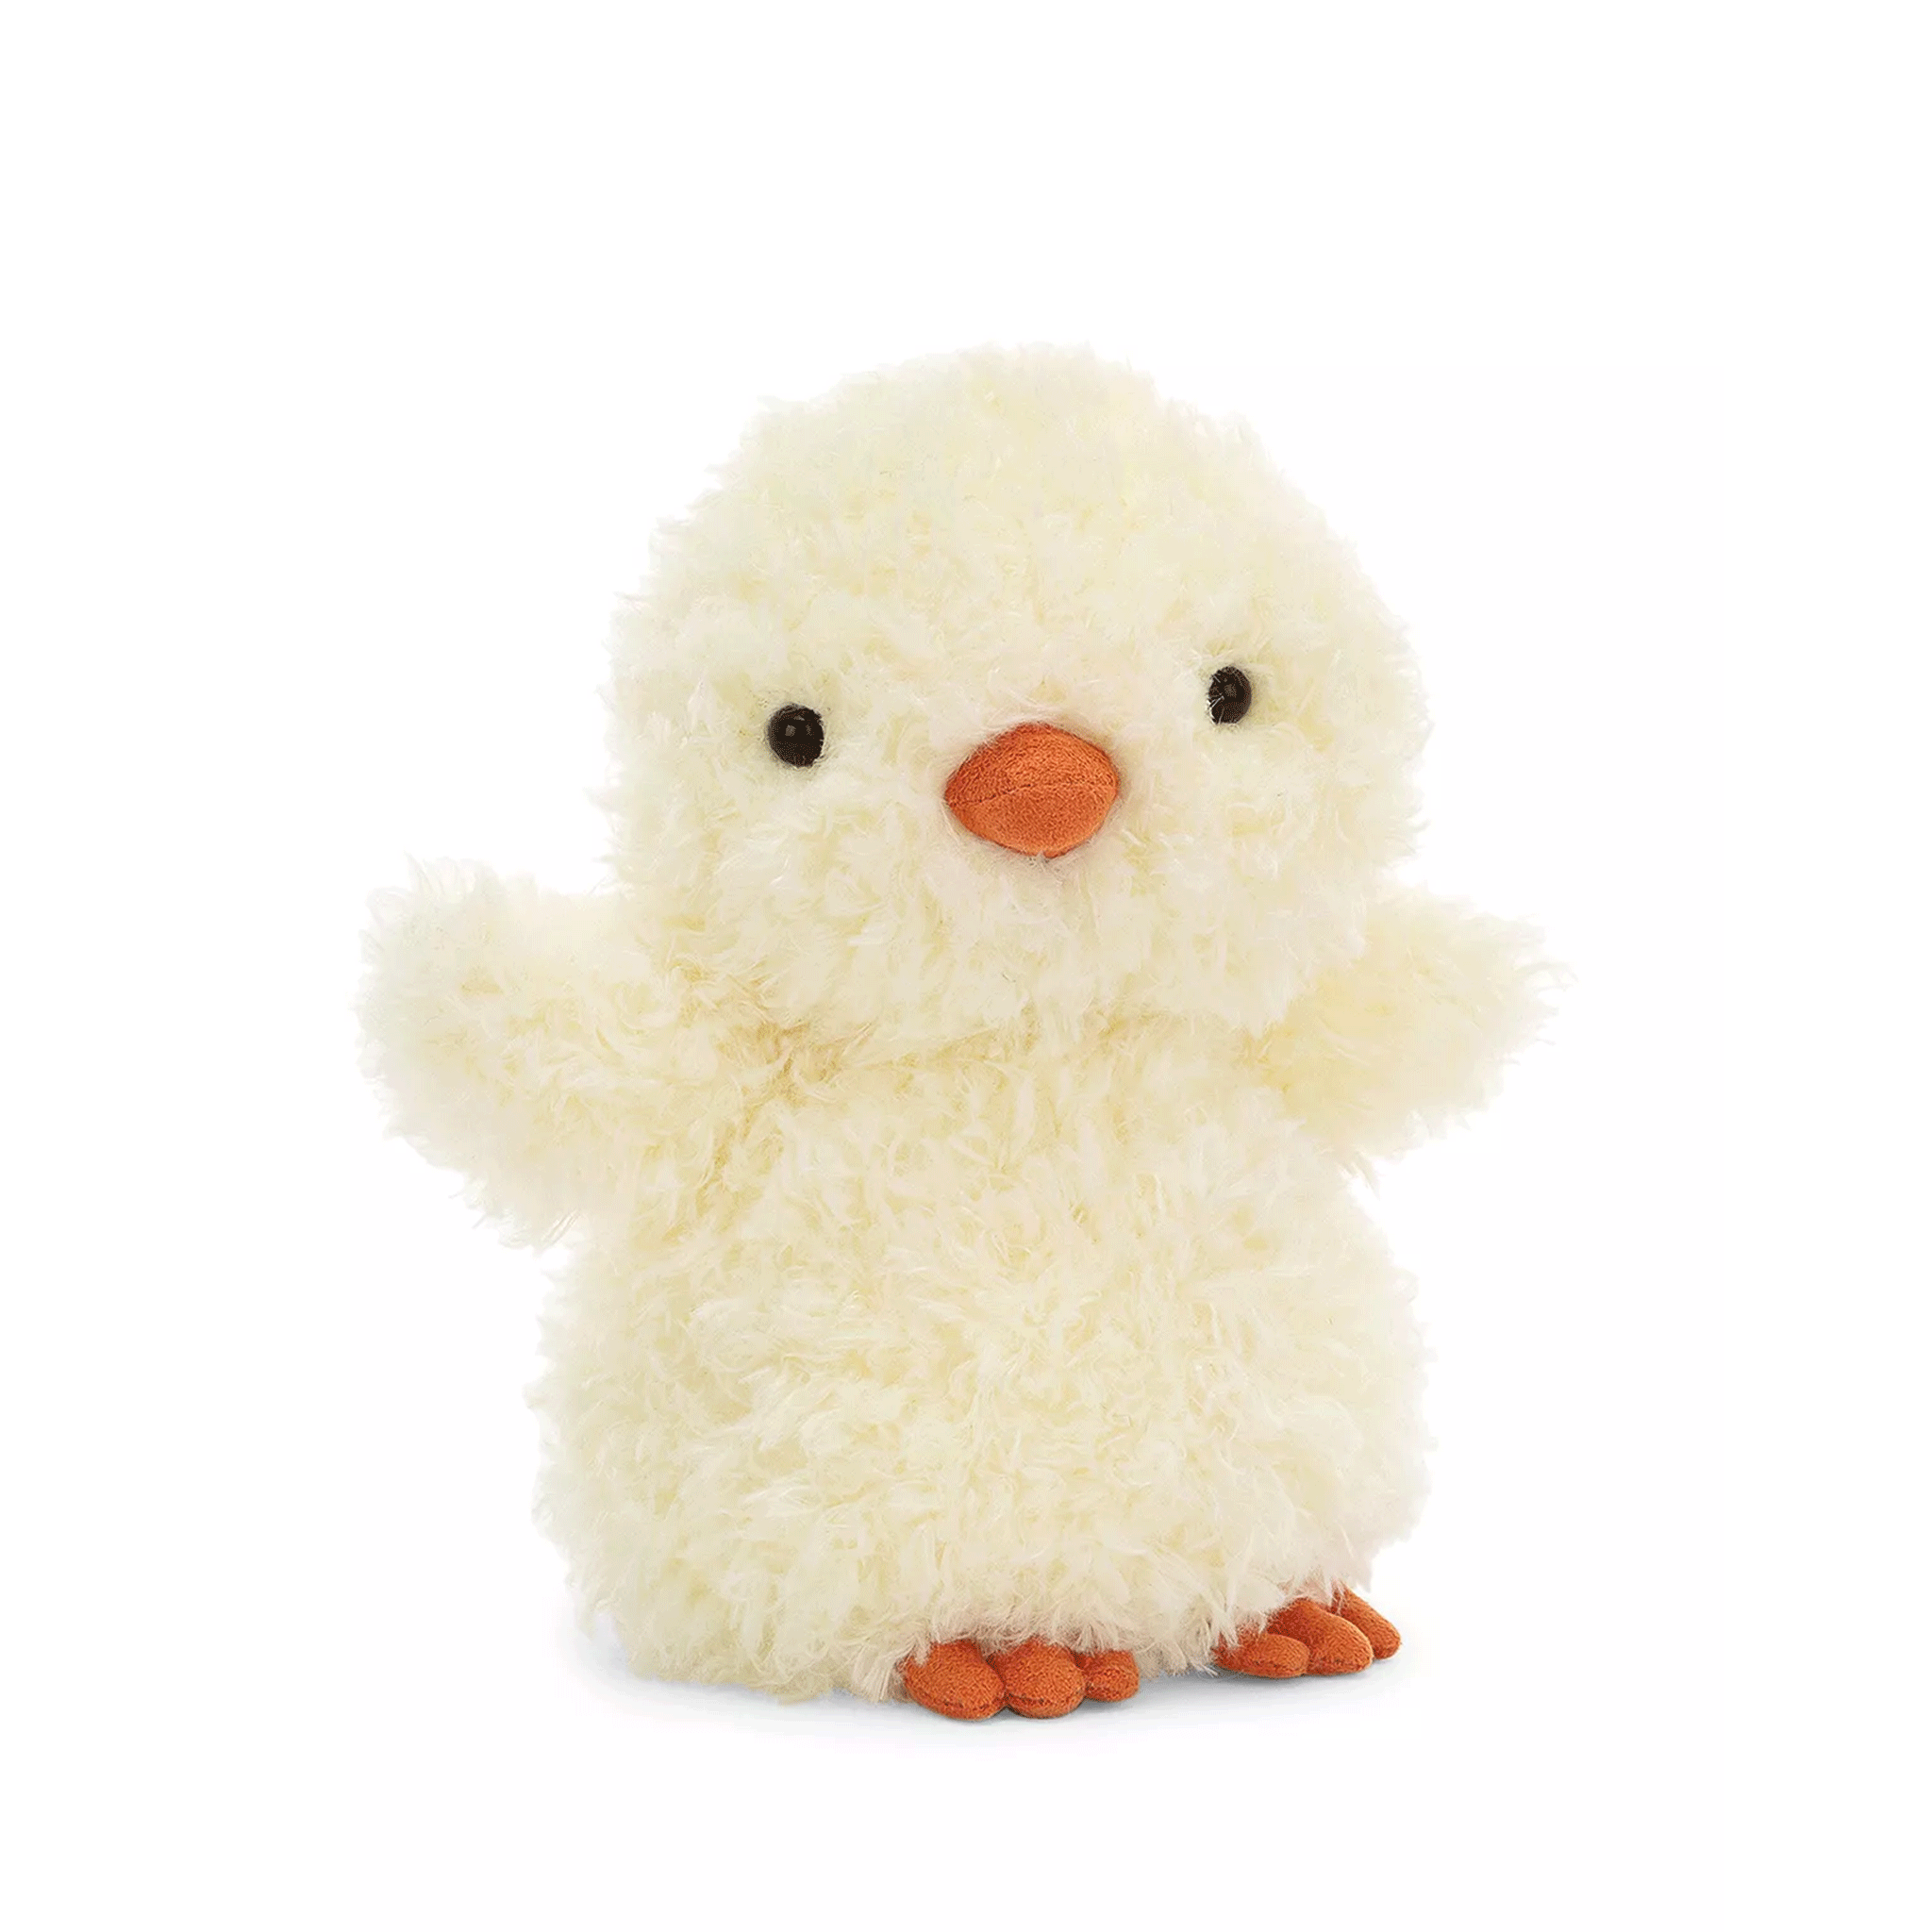 On a white background is a super light yellow fuzzy chick stuffed animal toy with an orange beak and feet. 